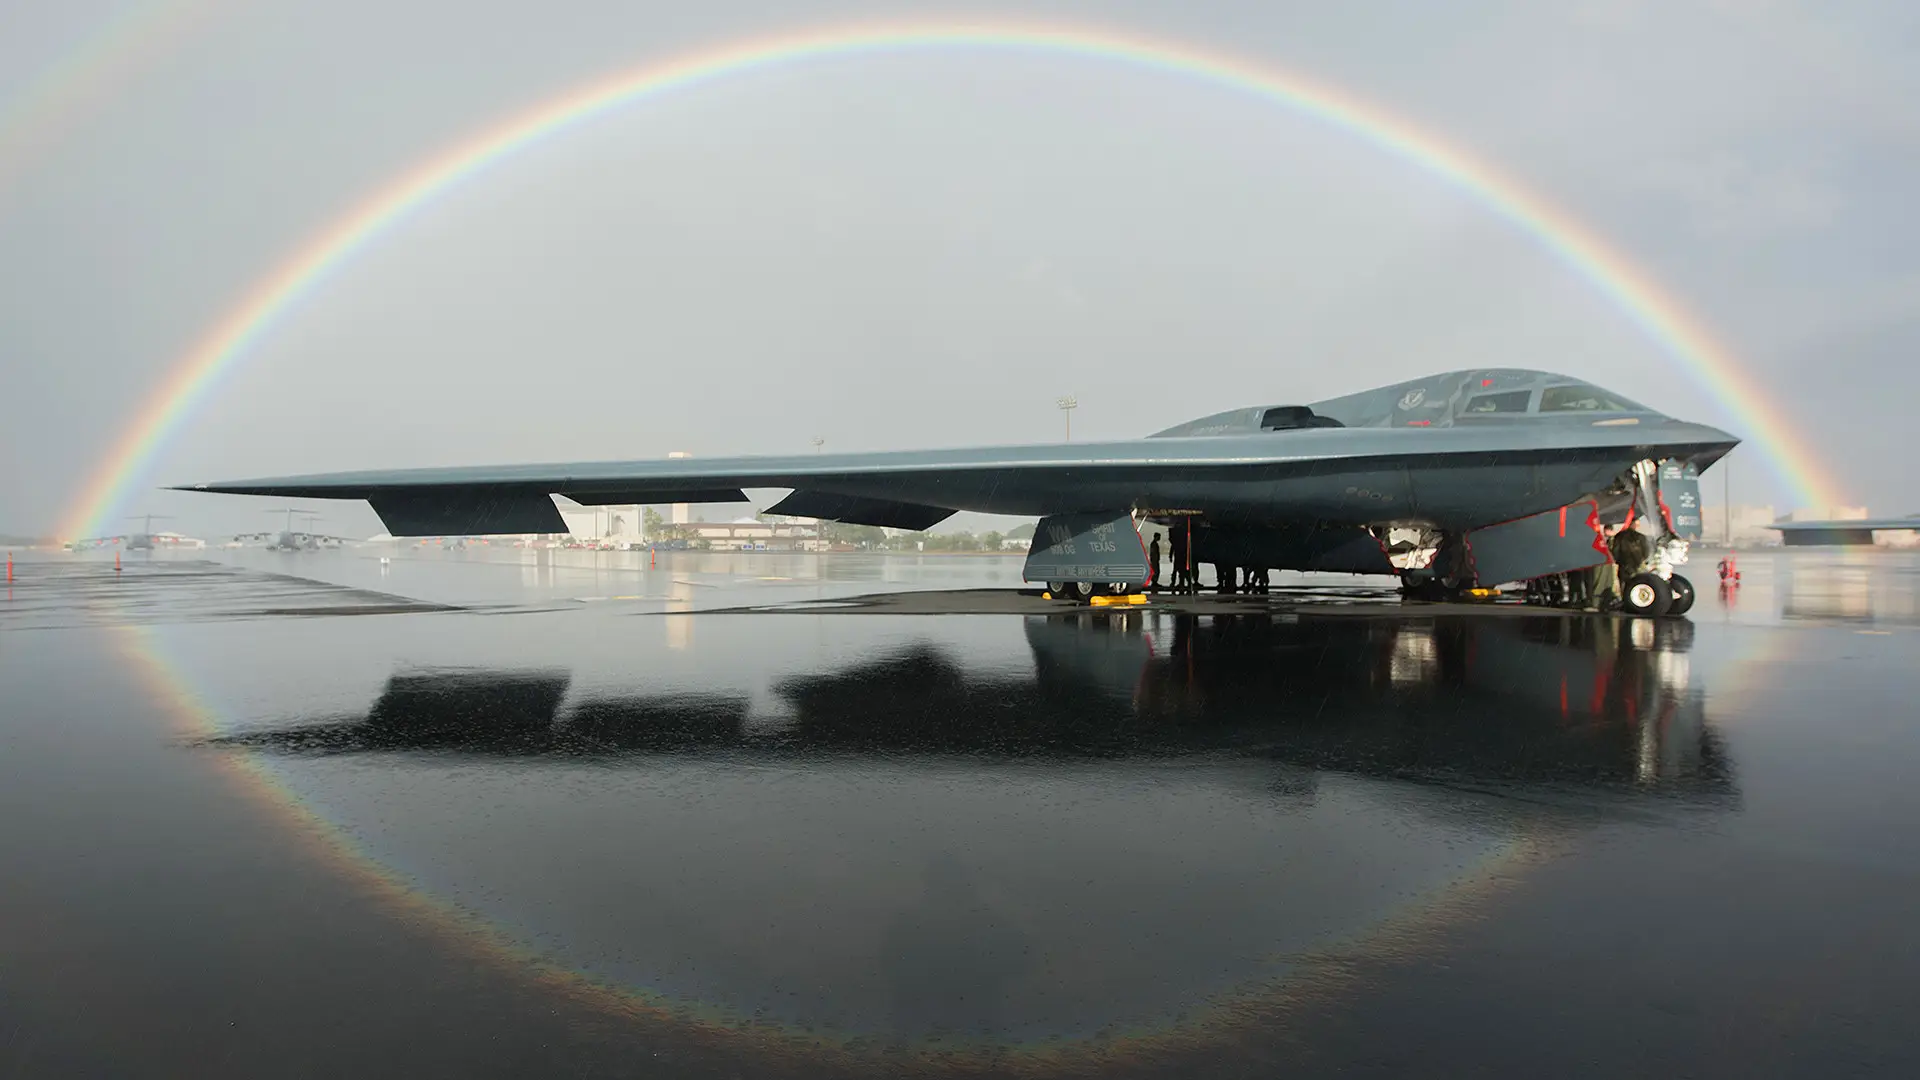 The B-2A Spirit nuclear bomber makes a surprise appearance in Hawaii